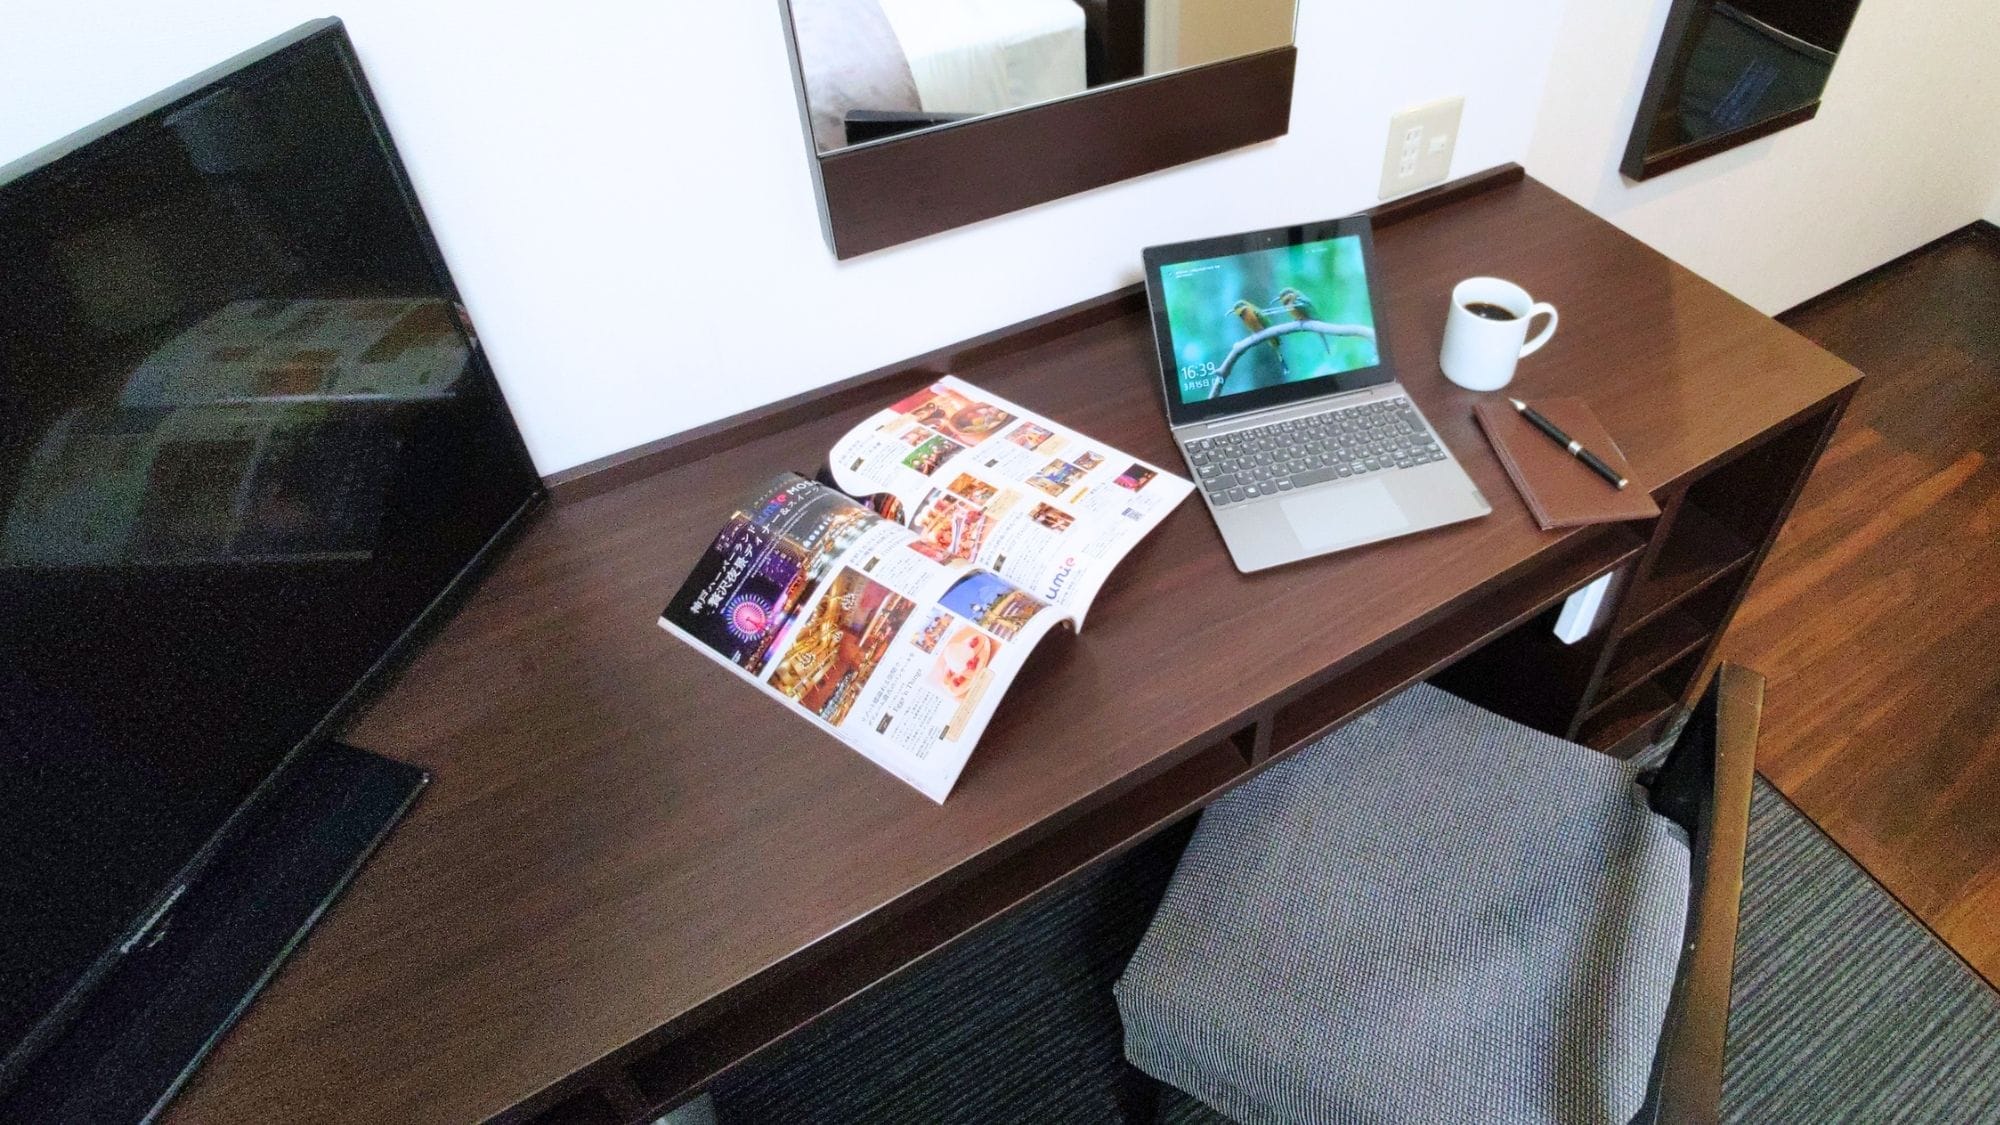 ◆Guest room - You can use the desk spaciously. Perfect for work.